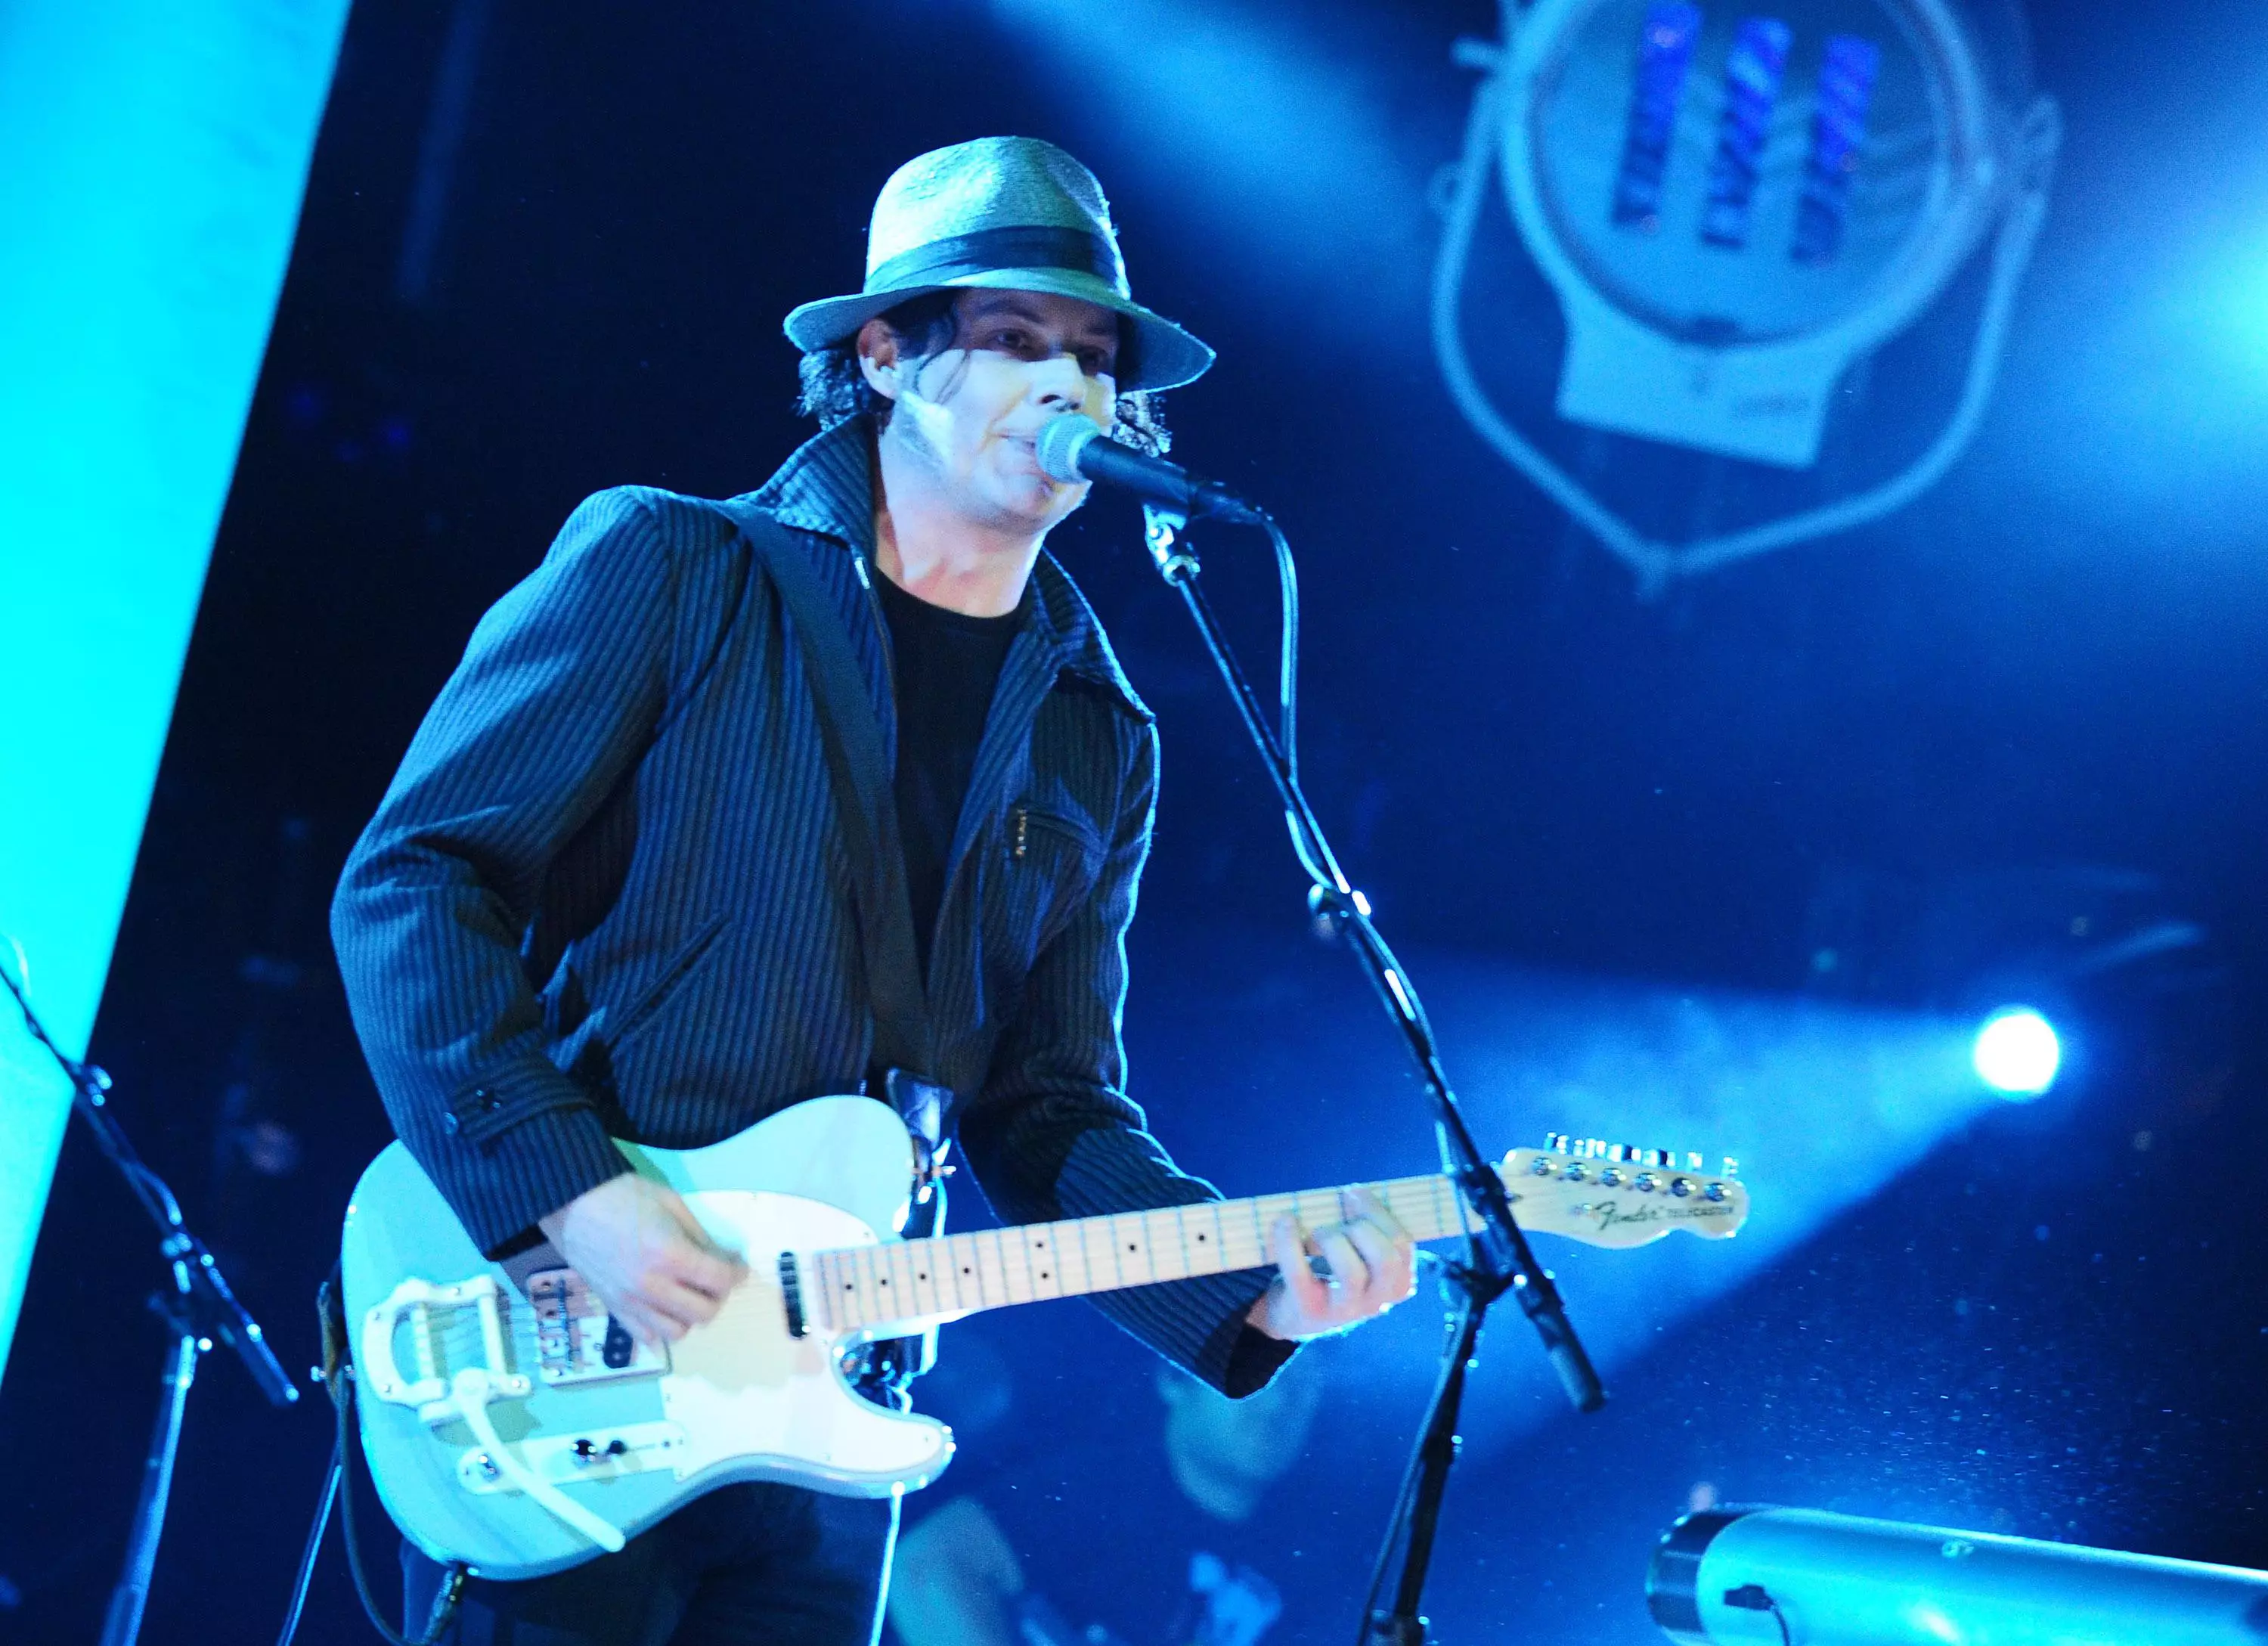 Jack White Has Banned Mobile Phones From Gigs.